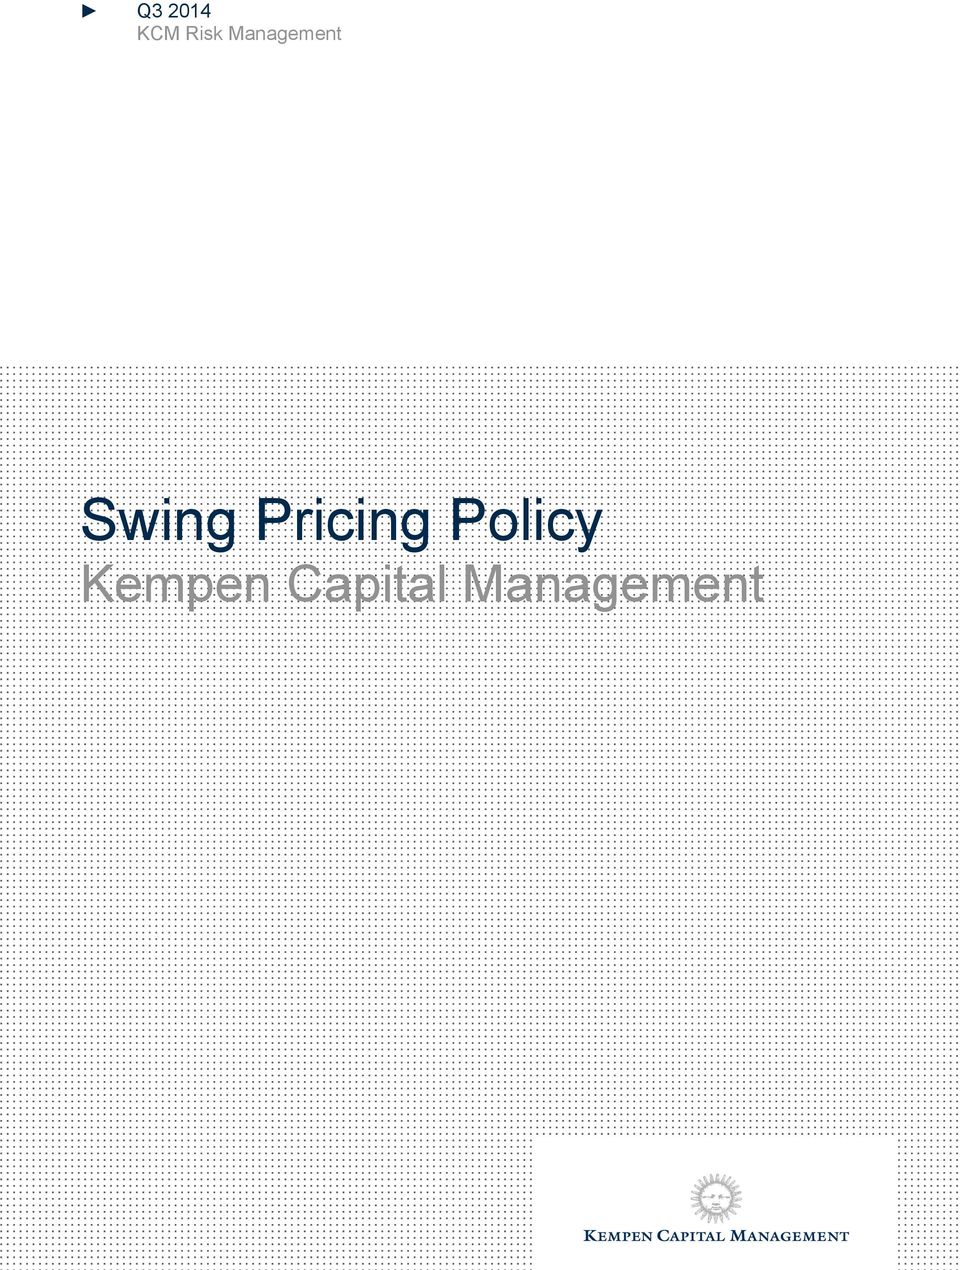 Pricing Policy